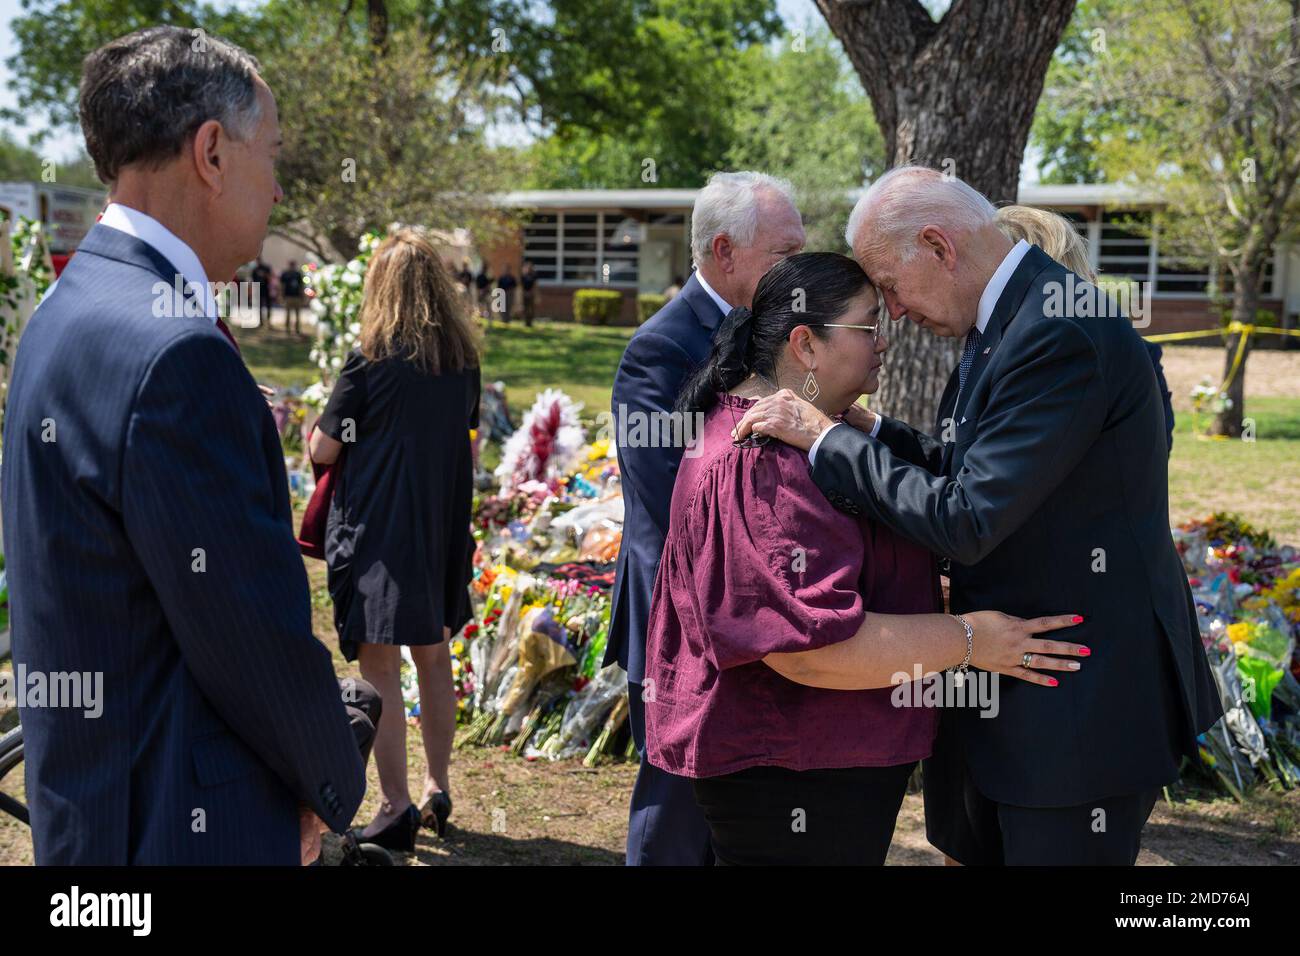 Reportage: President Joe Biden and First Lady Jill Biden meet with School Superintendent Dr. Hal Harrell and principal Mandy Gutierrez at the memorial for the victims of the May 24 mass shooting at Robb Elementary School in Uvalde, Texas, Sunday, May 29, 2022 Stock Photo